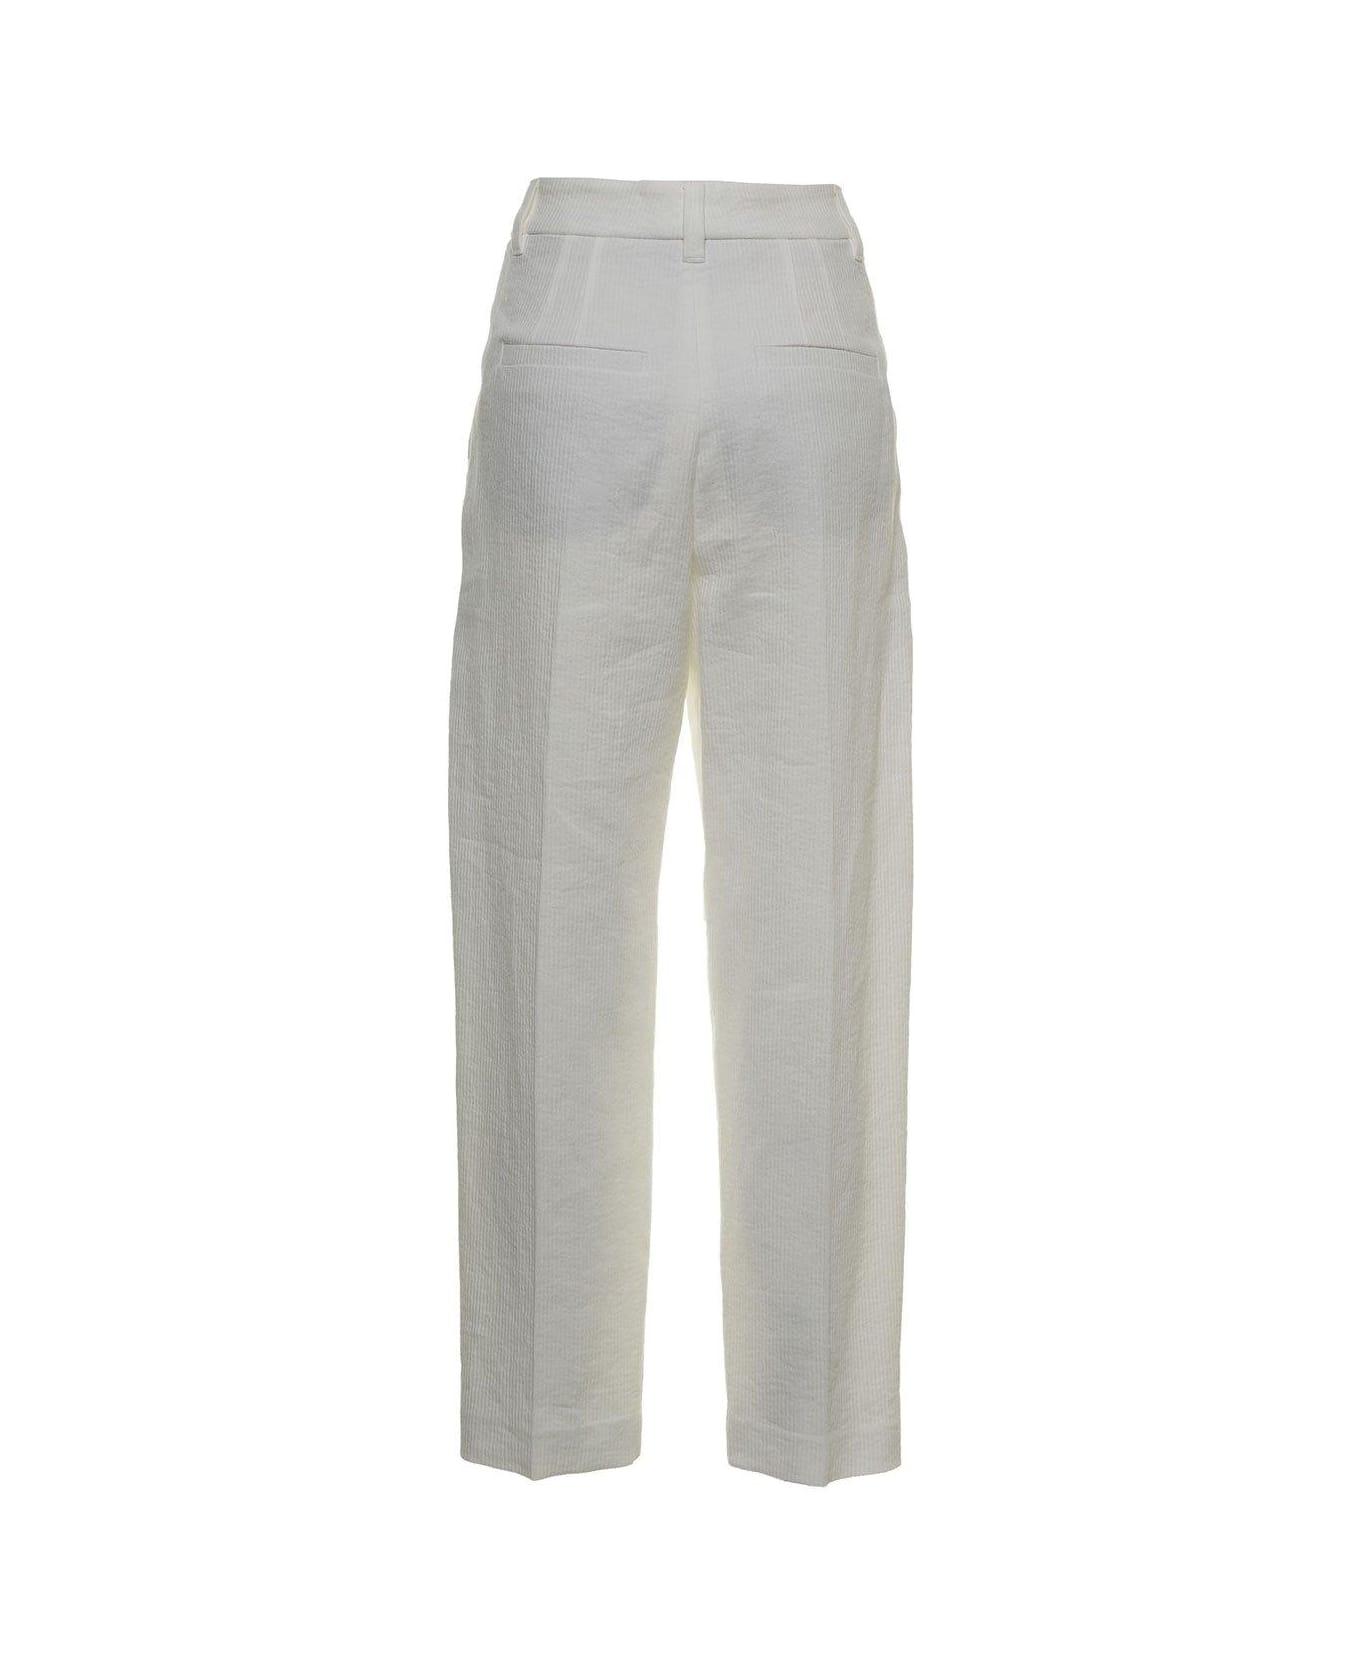 Brunello Cucinelli Pleat Detailed Tapered Pants - White